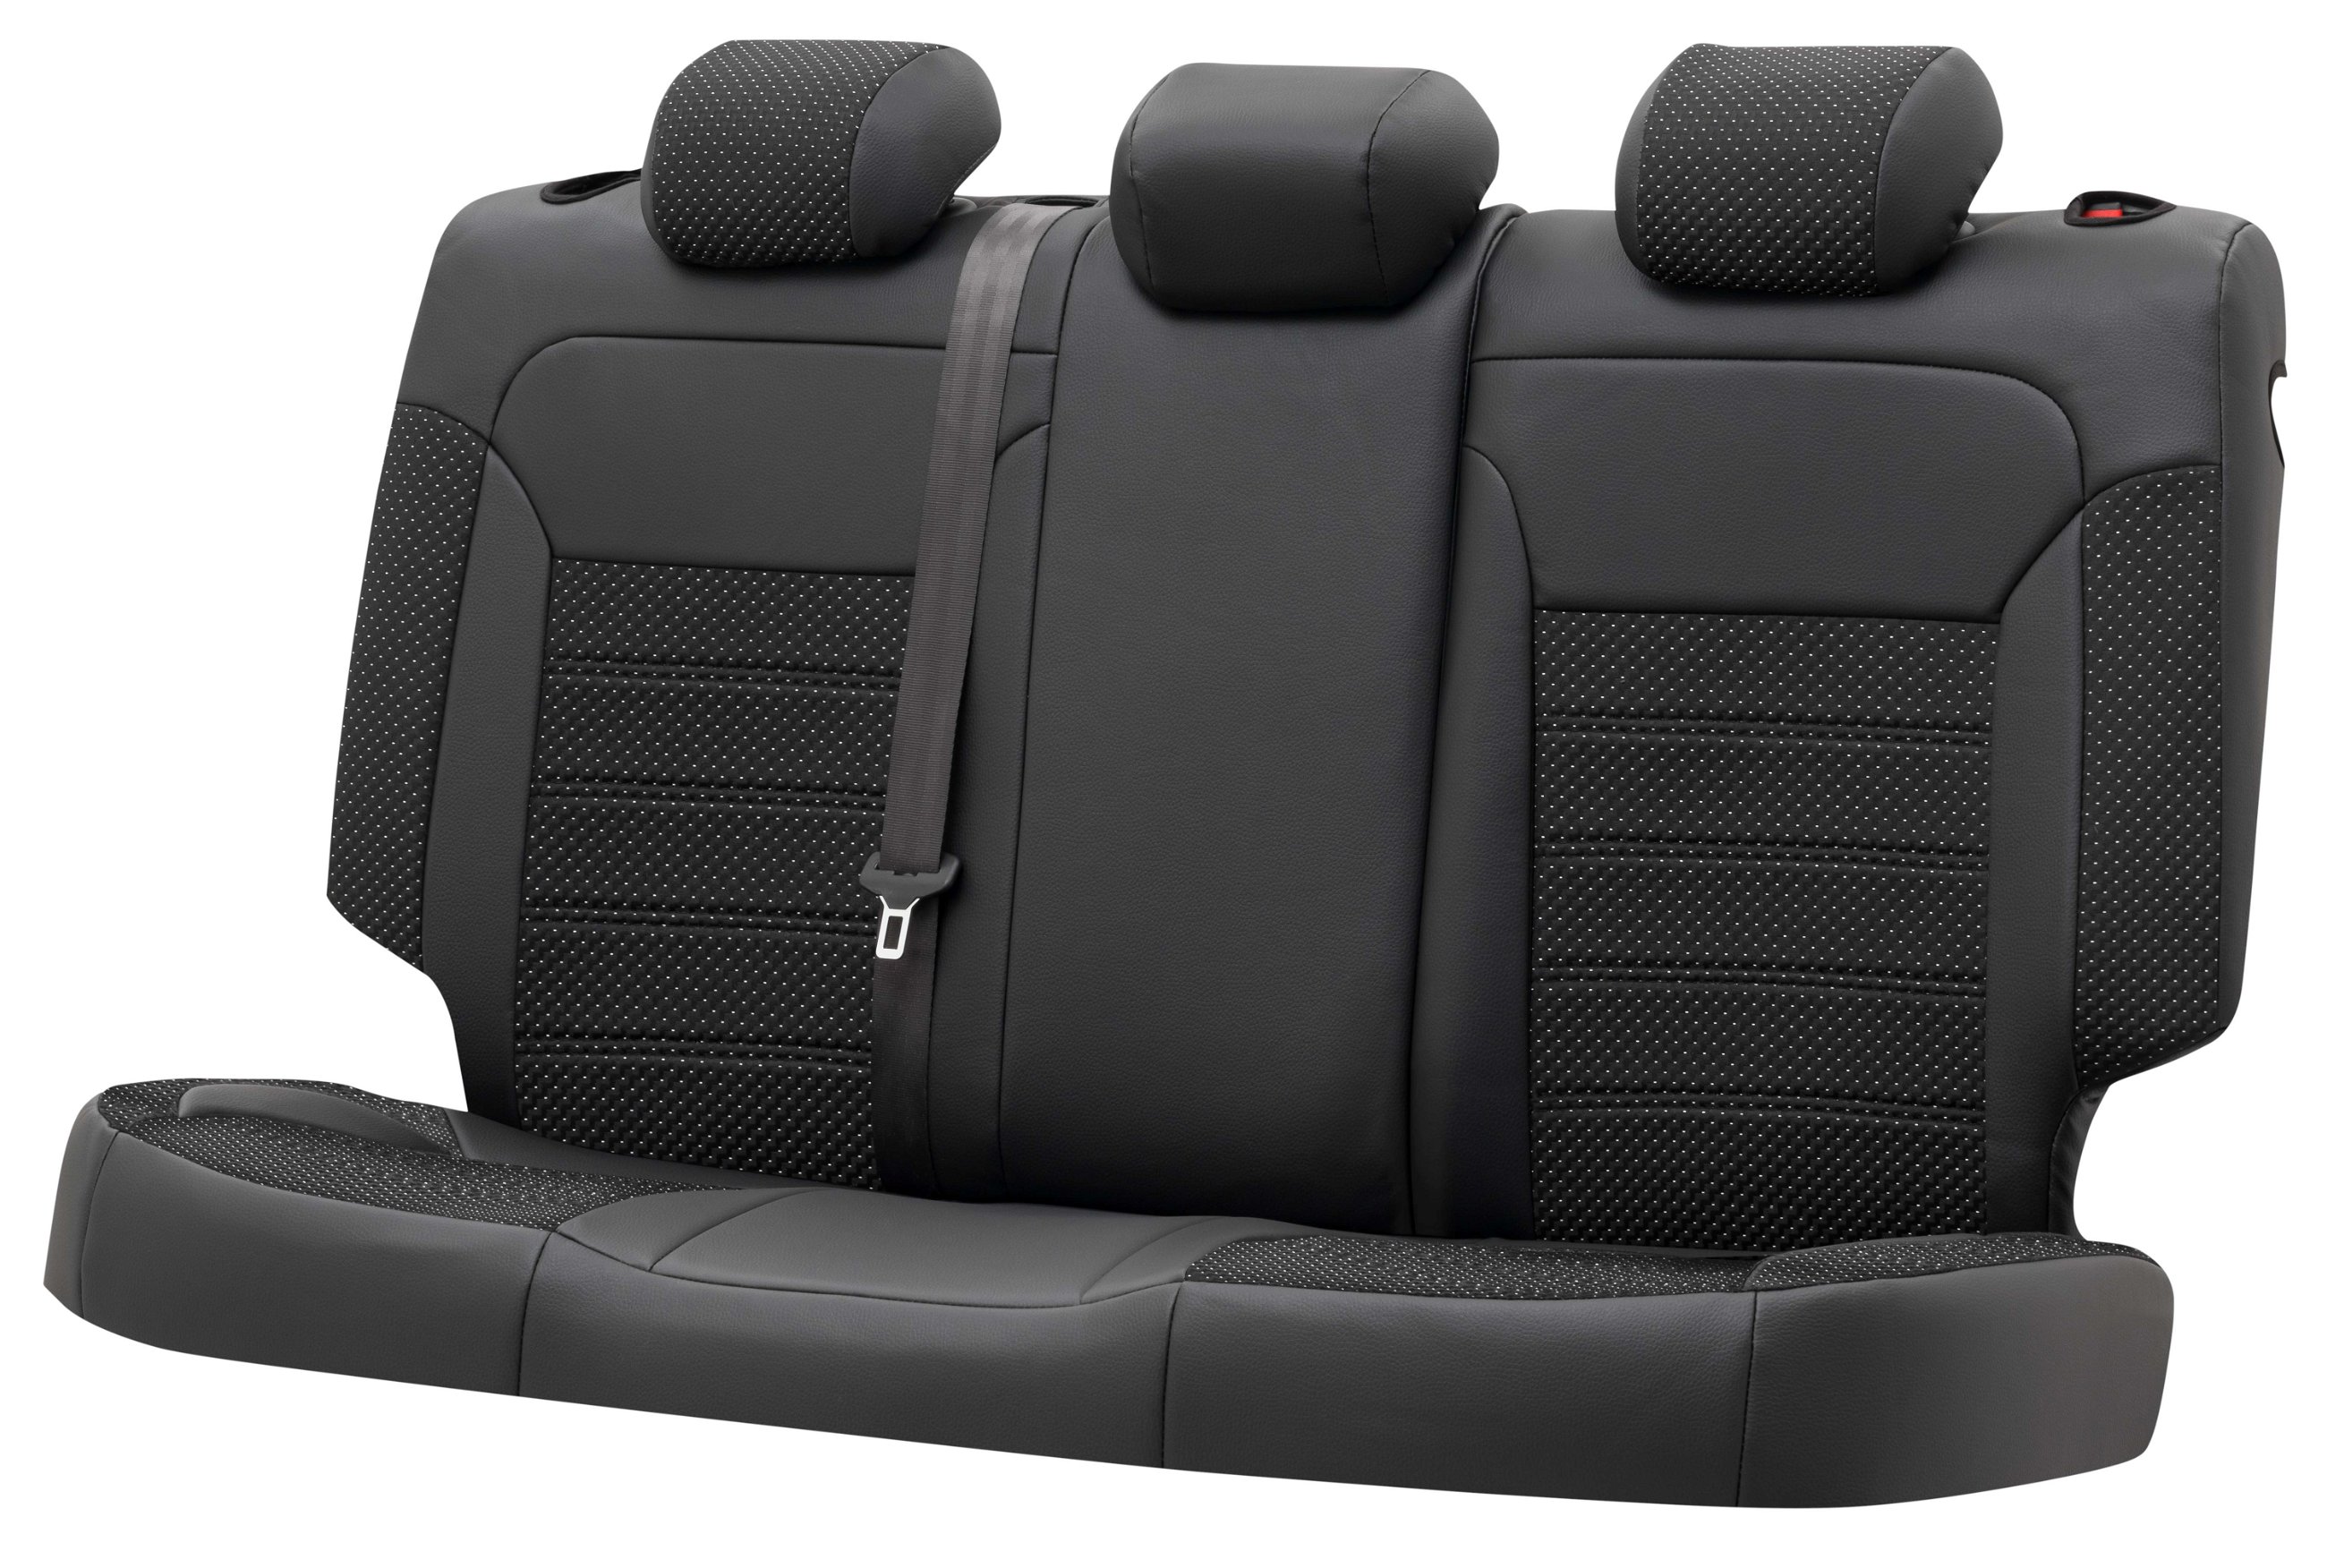 Seat cover Torino for VW Polo Comfortline from 2017-Today, 1 rear seat cover for normal seats